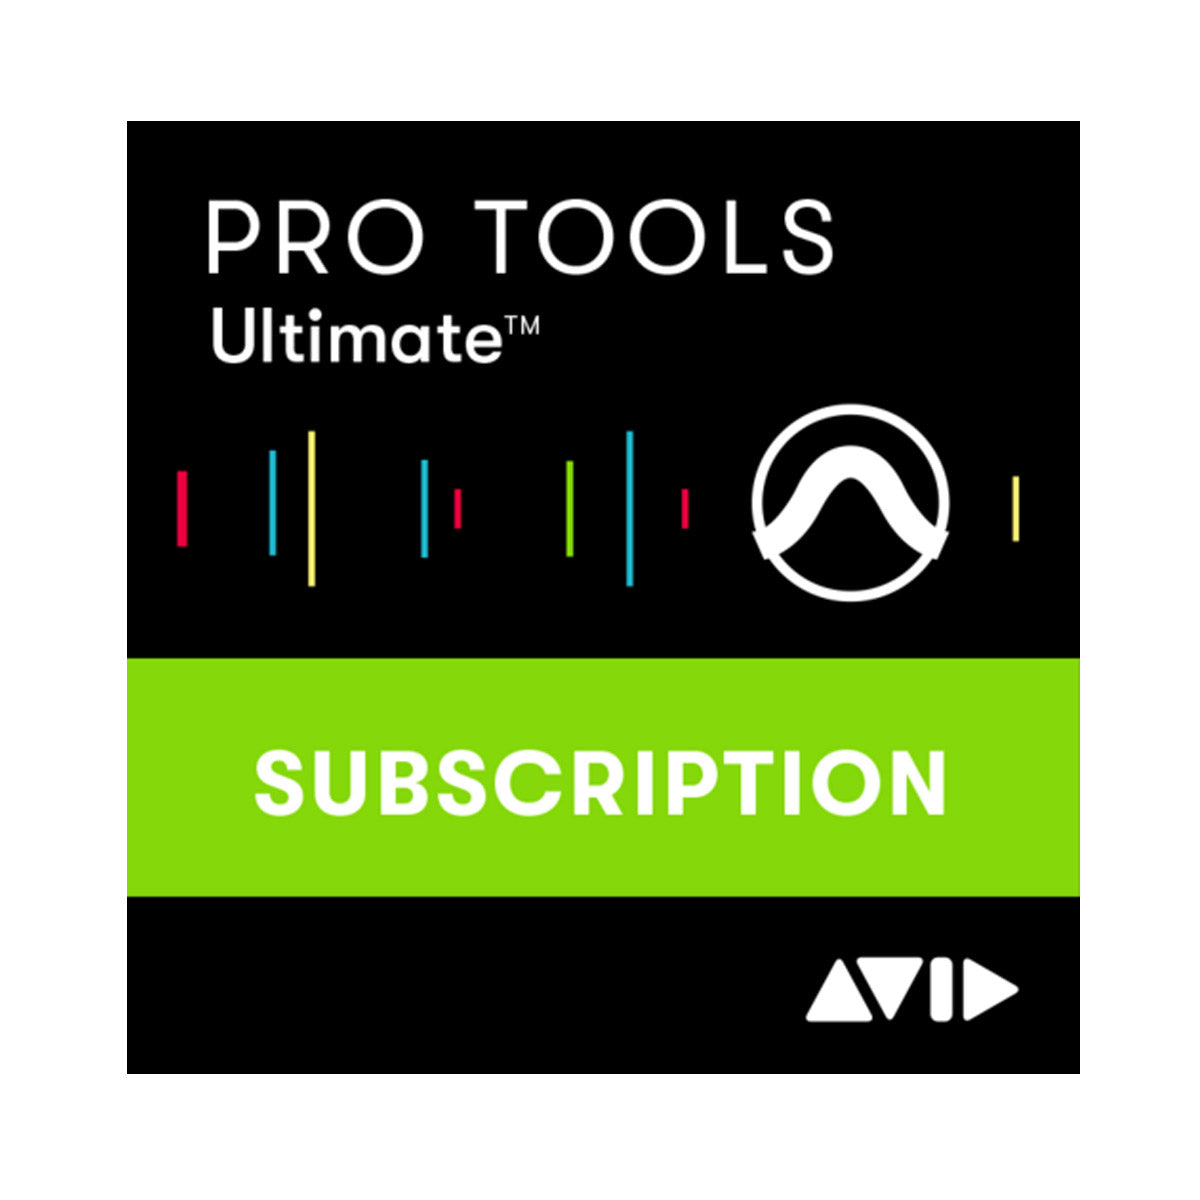 AVID Pro Tools Ultimate Software - 1 Year License (eLicense Serial Only)